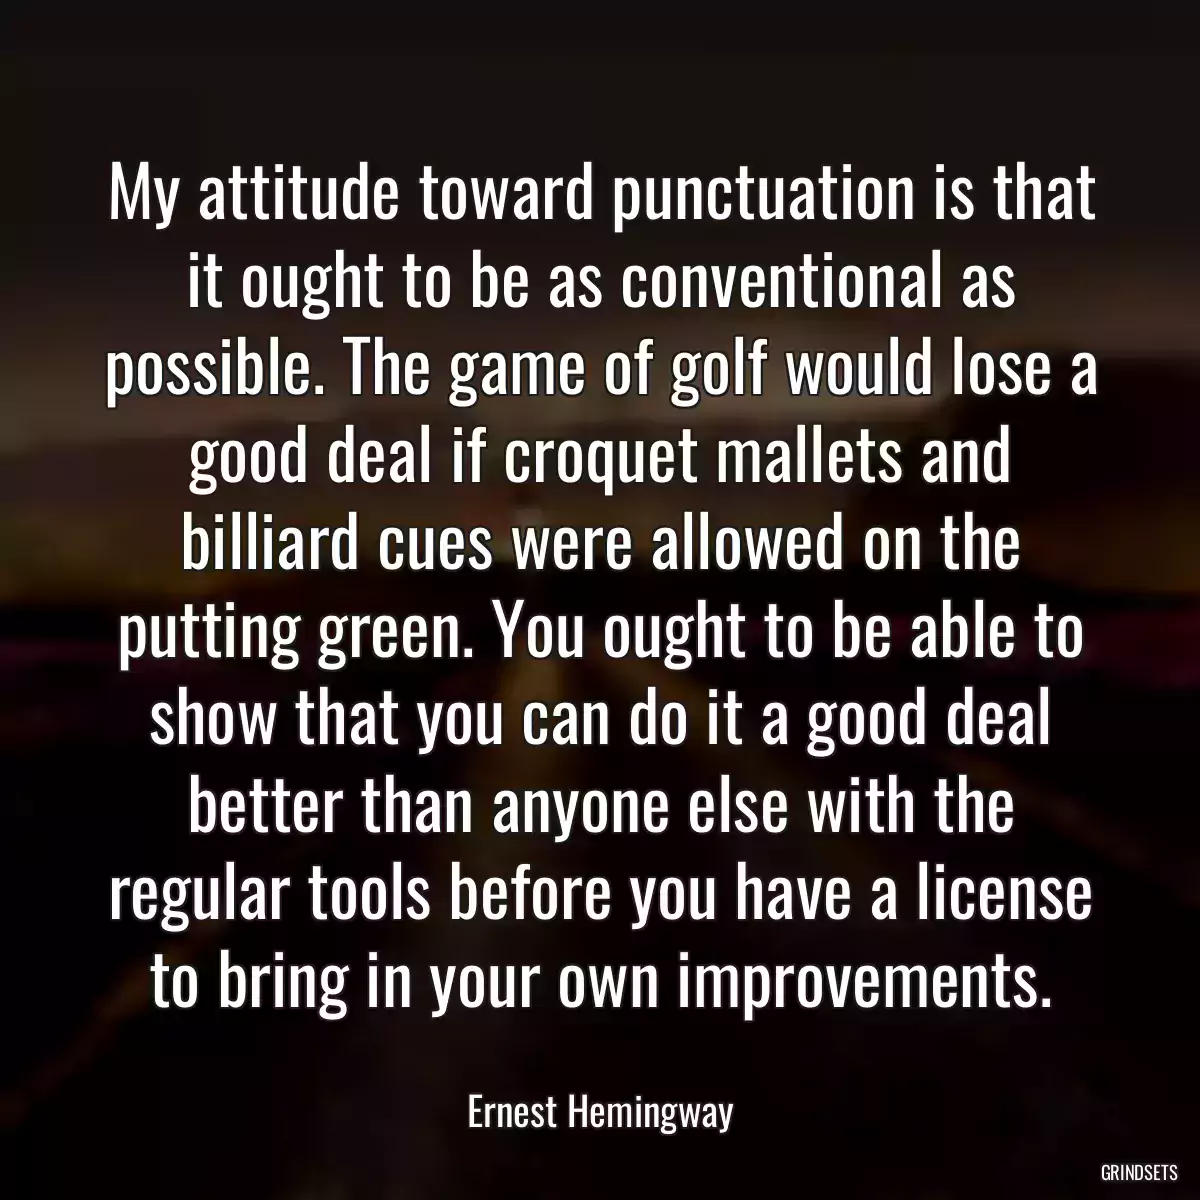 My attitude toward punctuation is that it ought to be as conventional as possible. The game of golf would lose a good deal if croquet mallets and billiard cues were allowed on the putting green. You ought to be able to show that you can do it a good deal better than anyone else with the regular tools before you have a license to bring in your own improvements.